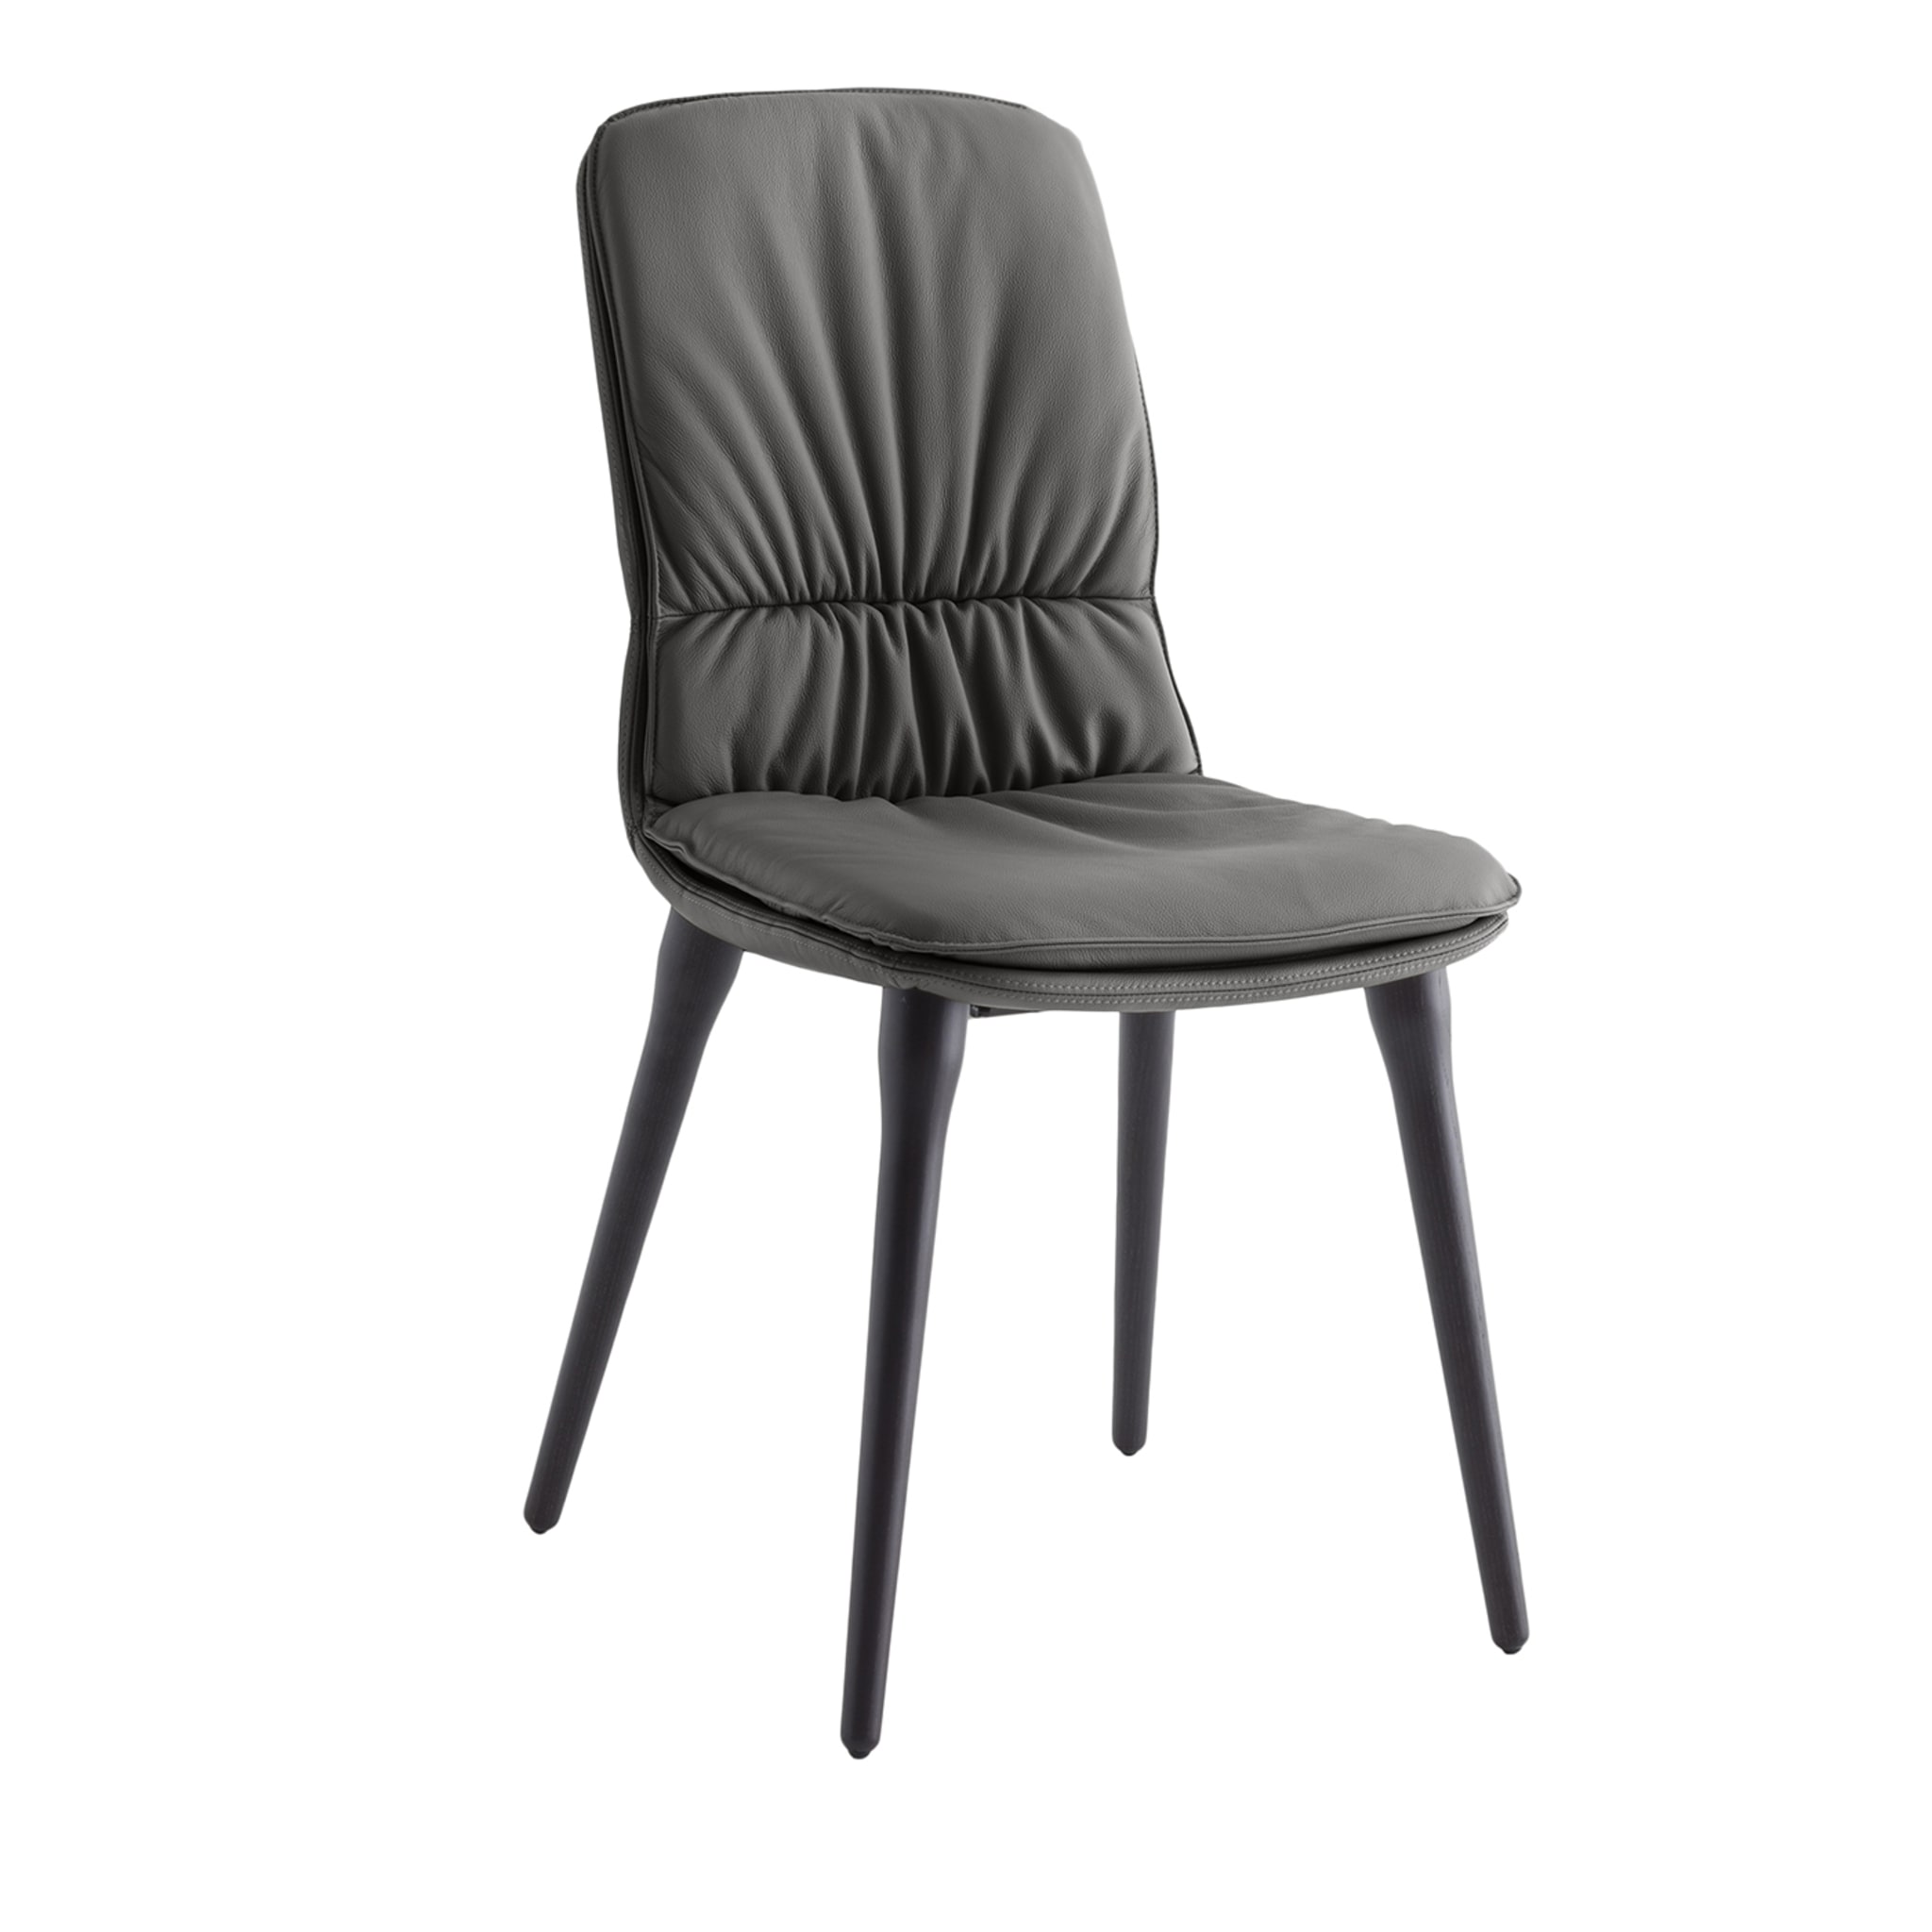 Coco Anthracite-Gray Chair - Main view